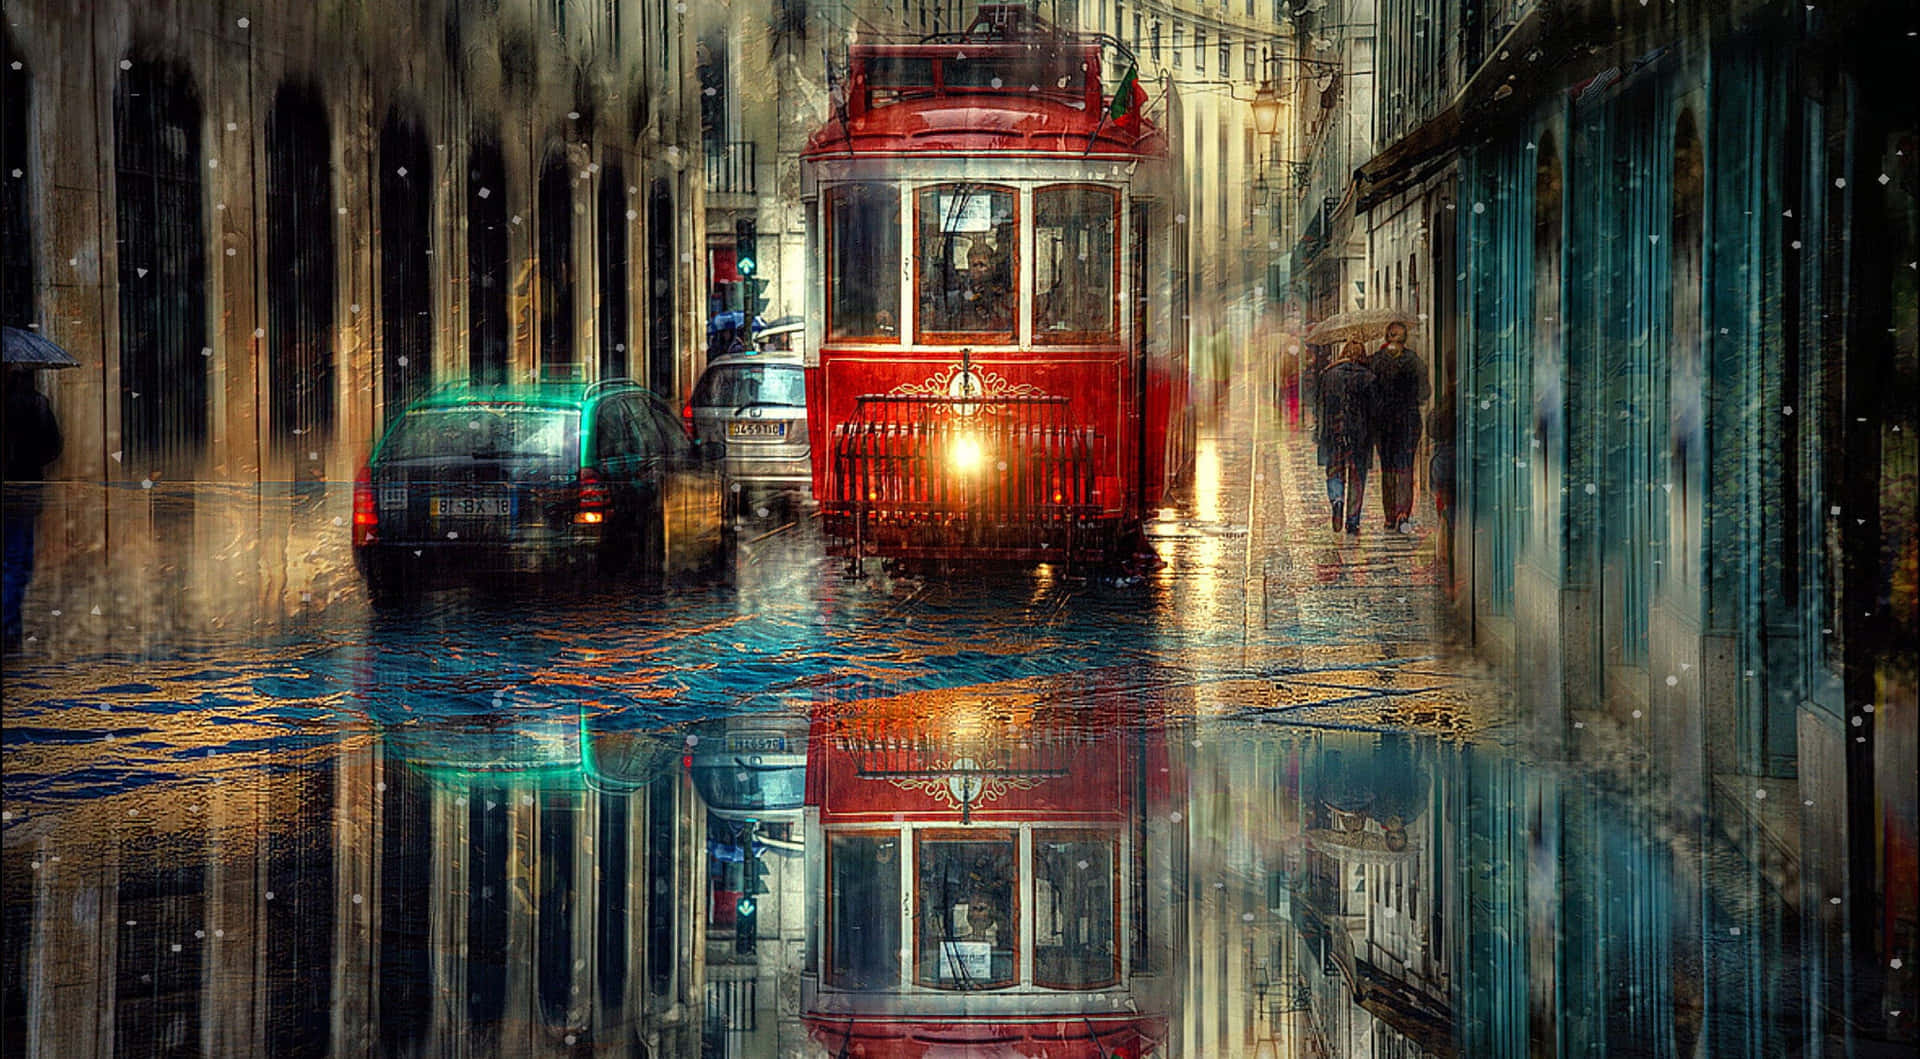 A Red Tram Driving Down A Street